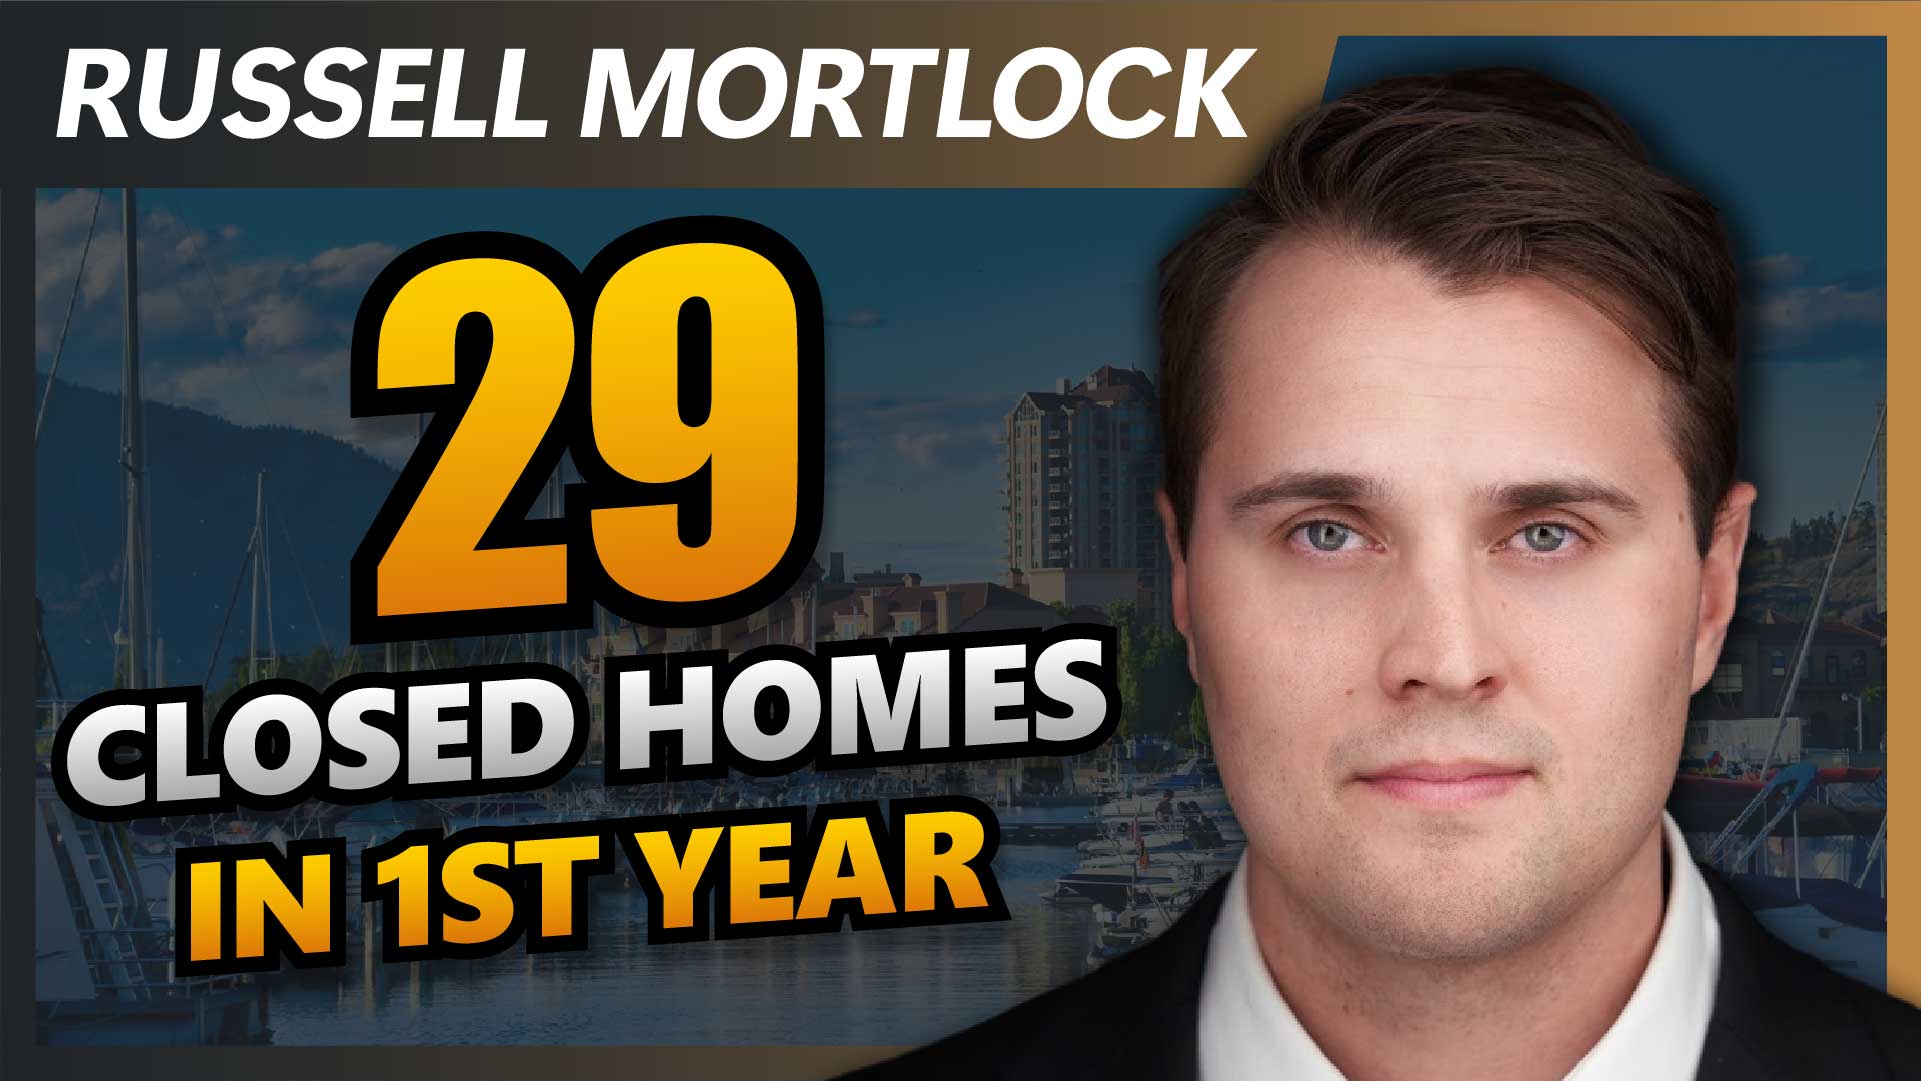 Russell Mortlock Agent Launch Reviews